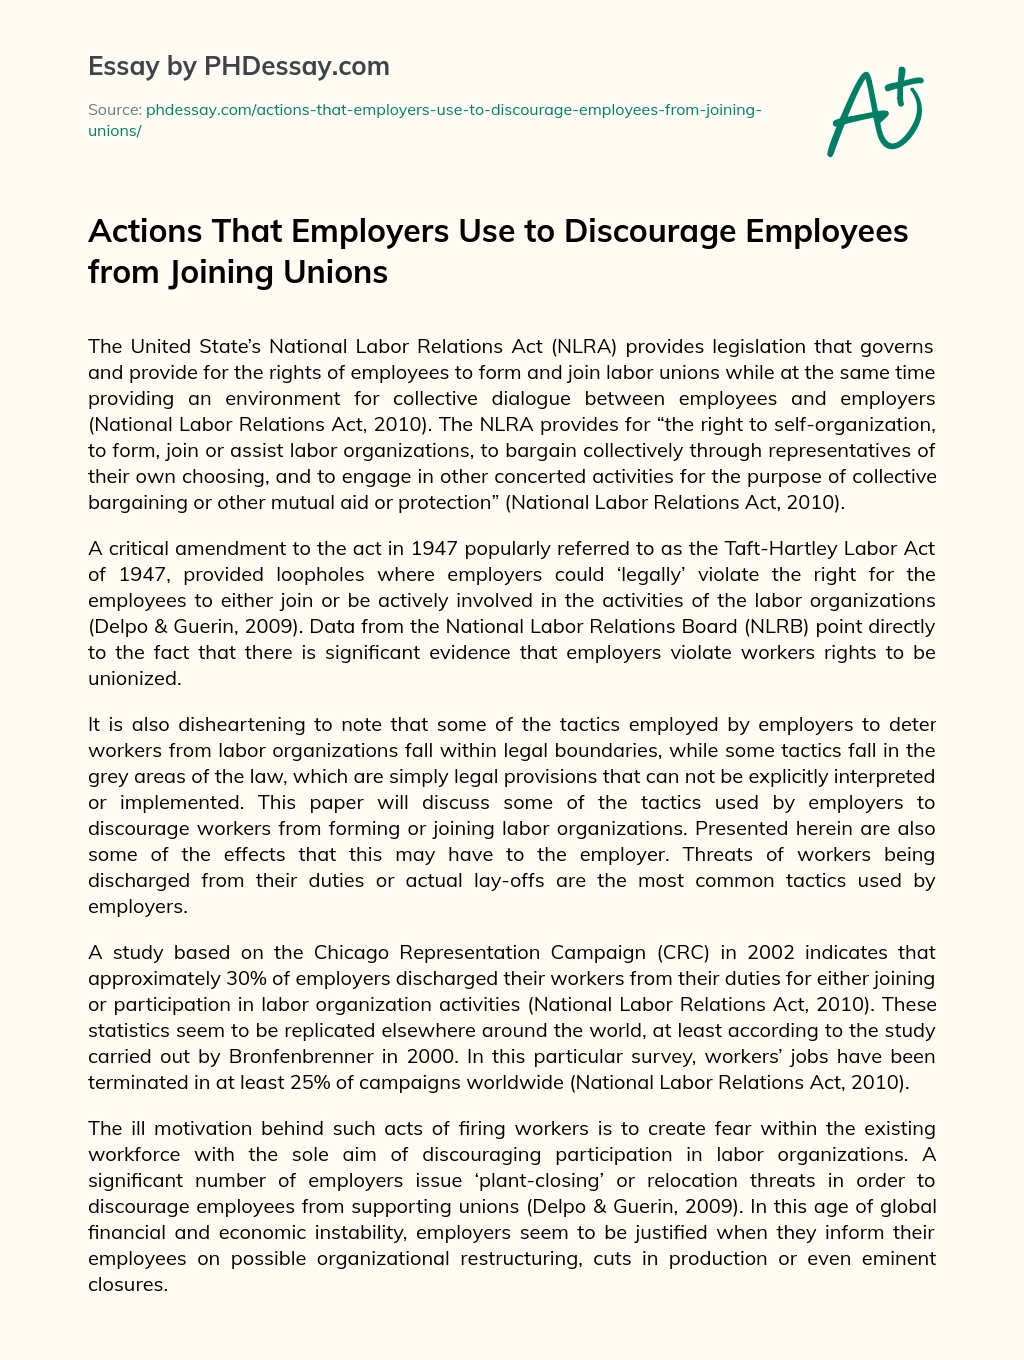 Actions That Employers Use to Discourage Employees from Joining Unions essay